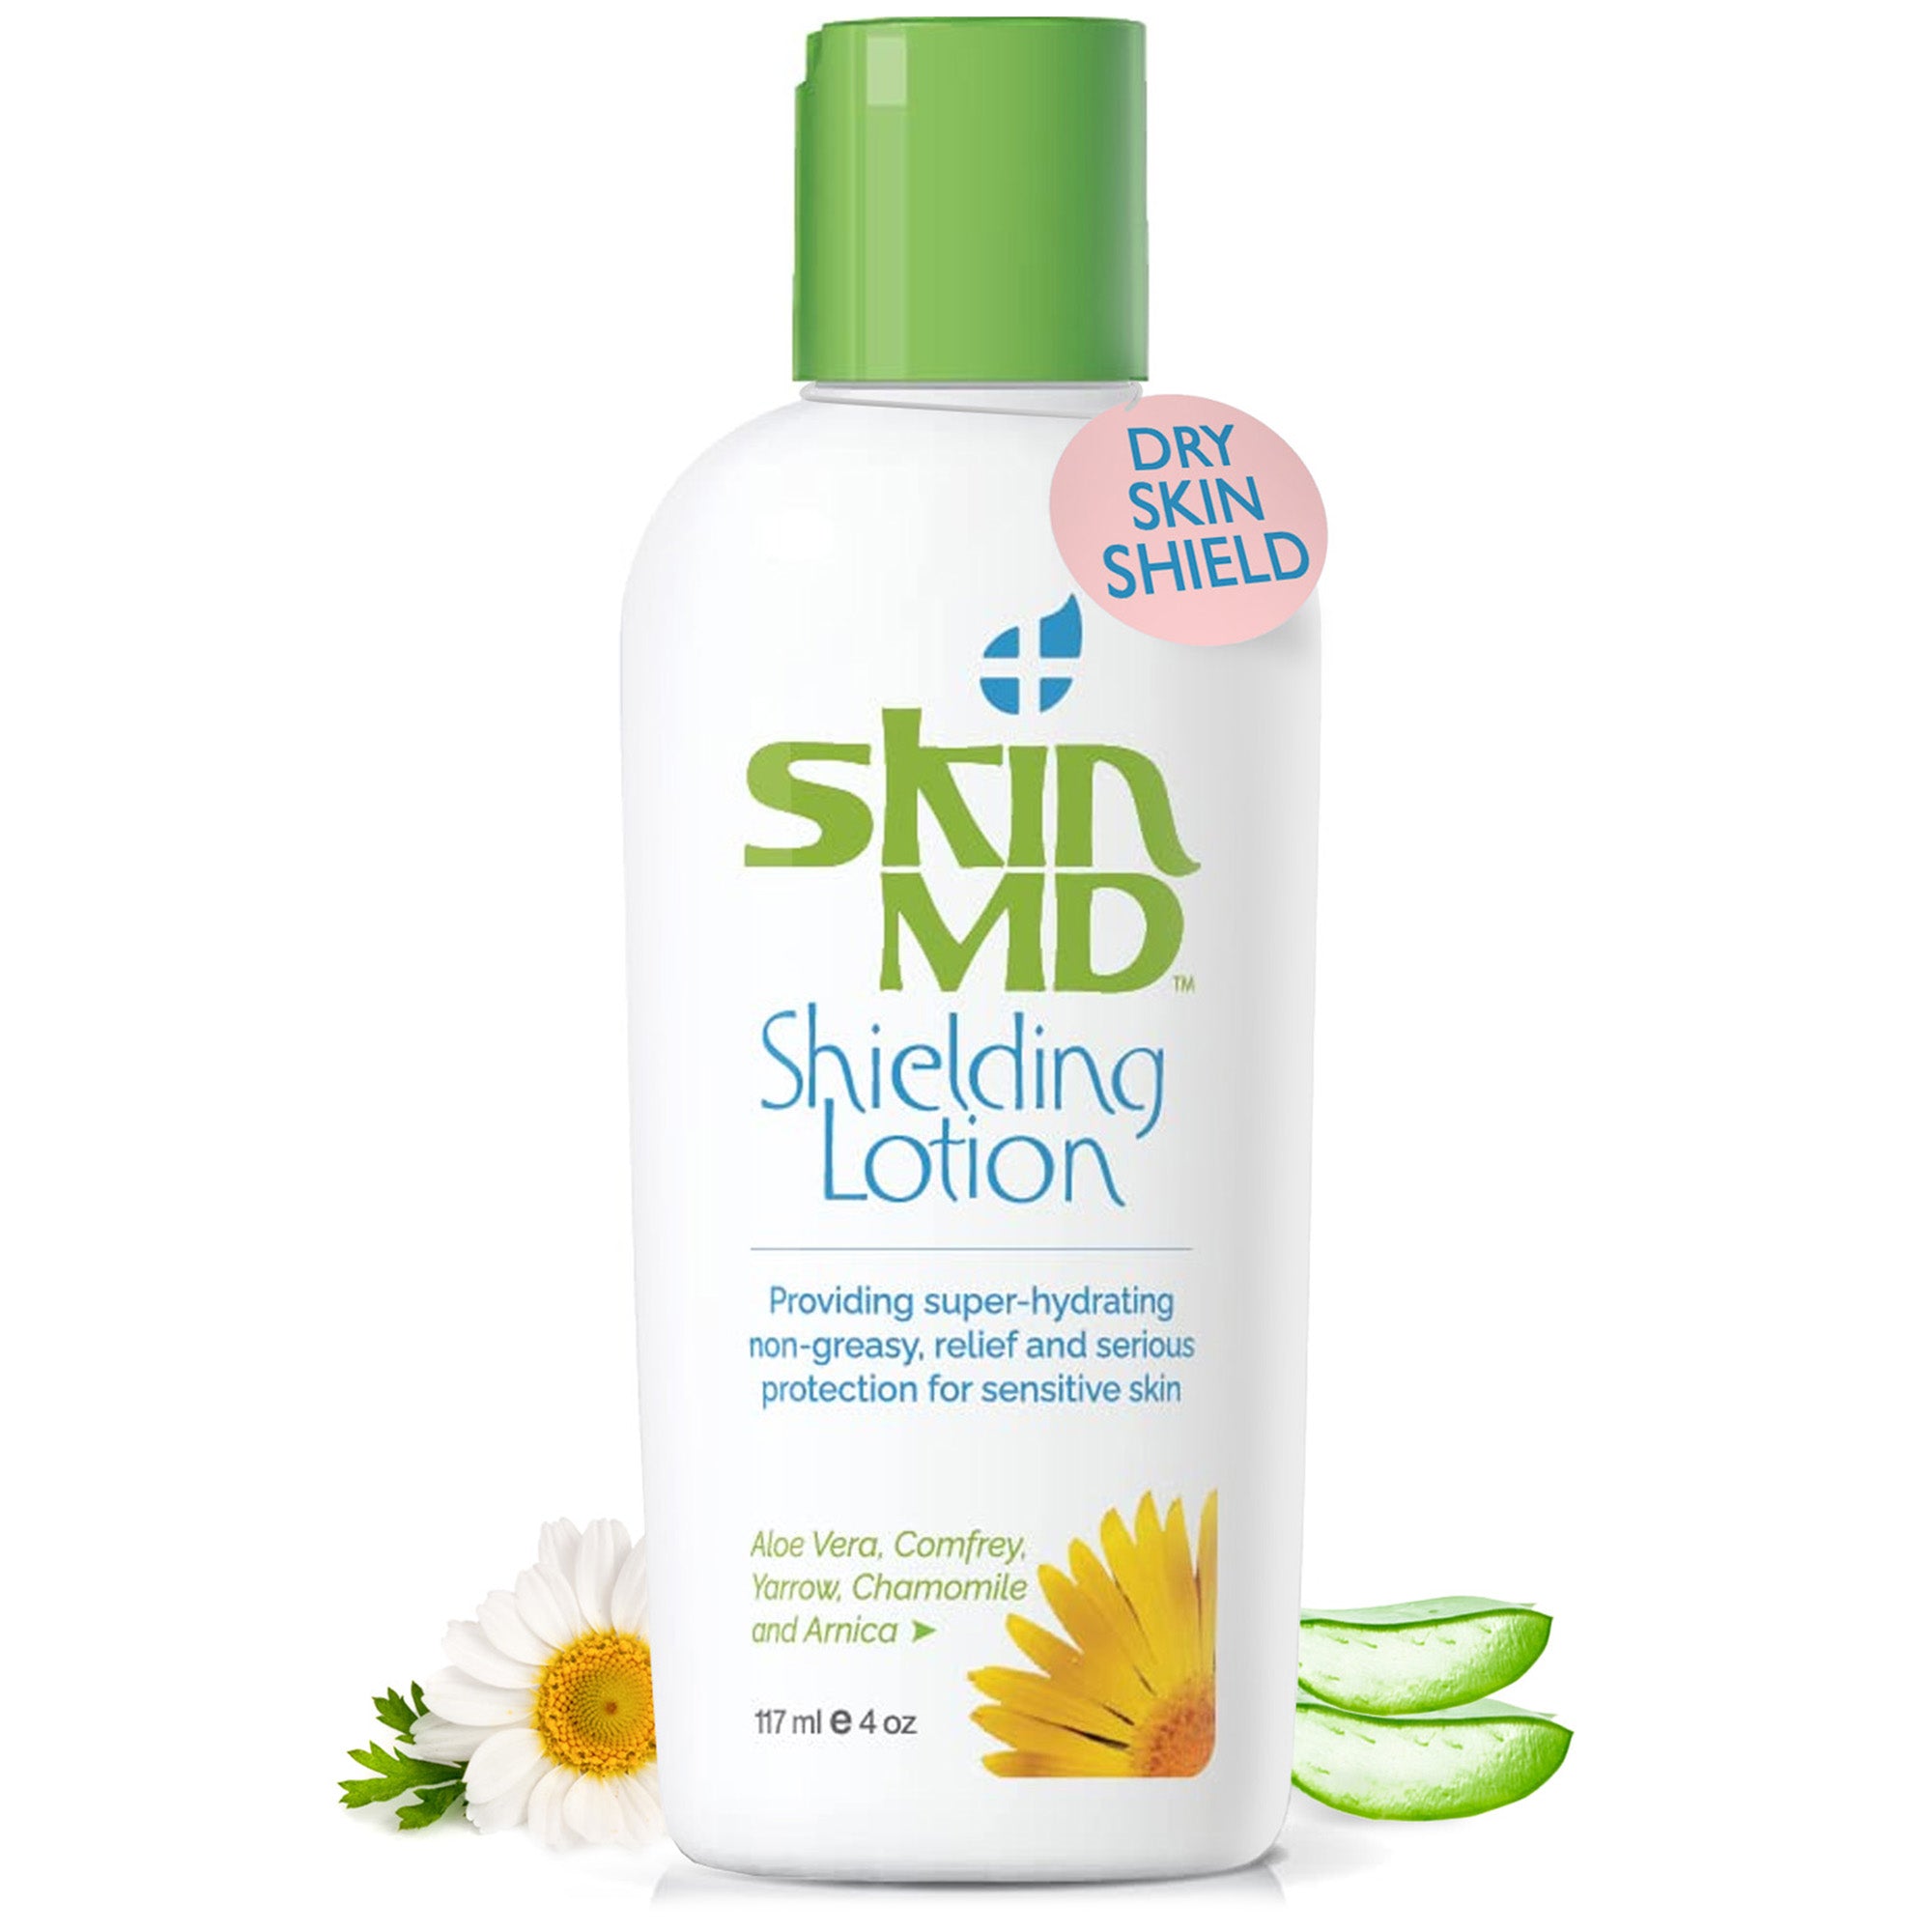 Skin MD Shielding Lotion 4oz - hydrating, non-greasy, relief & serious protection for sensitive skin